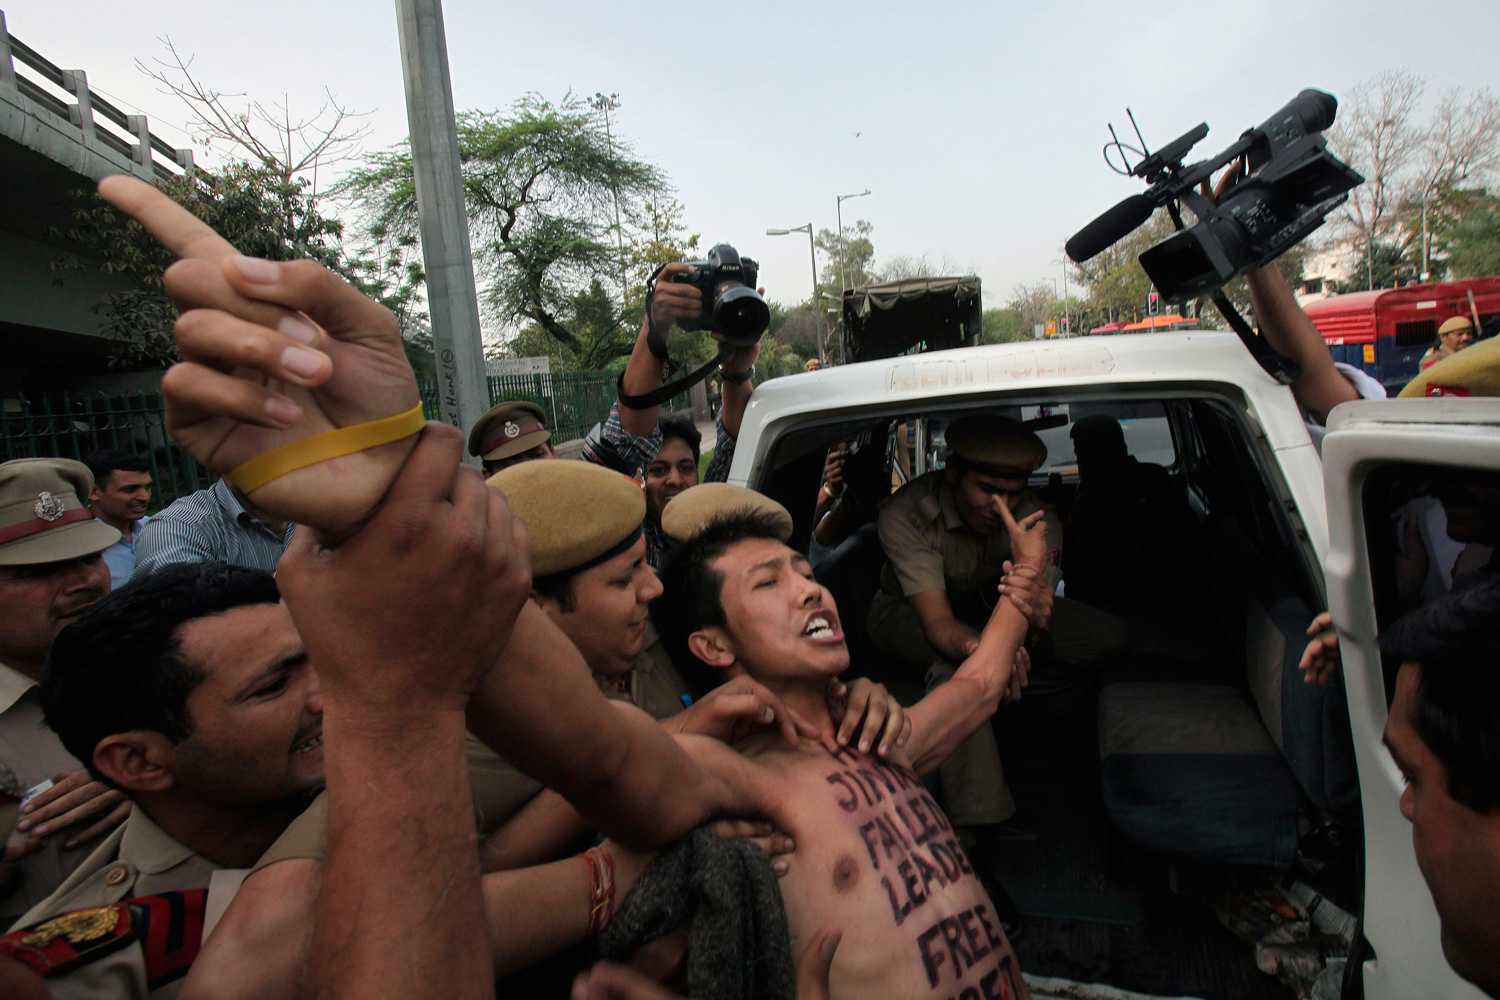 March 28, 2012. A Tibetan exile is detained by police during a protest against the visit of Chinese President Hu Jintao, outside the hotel where Hu is staying, in New Delhi.